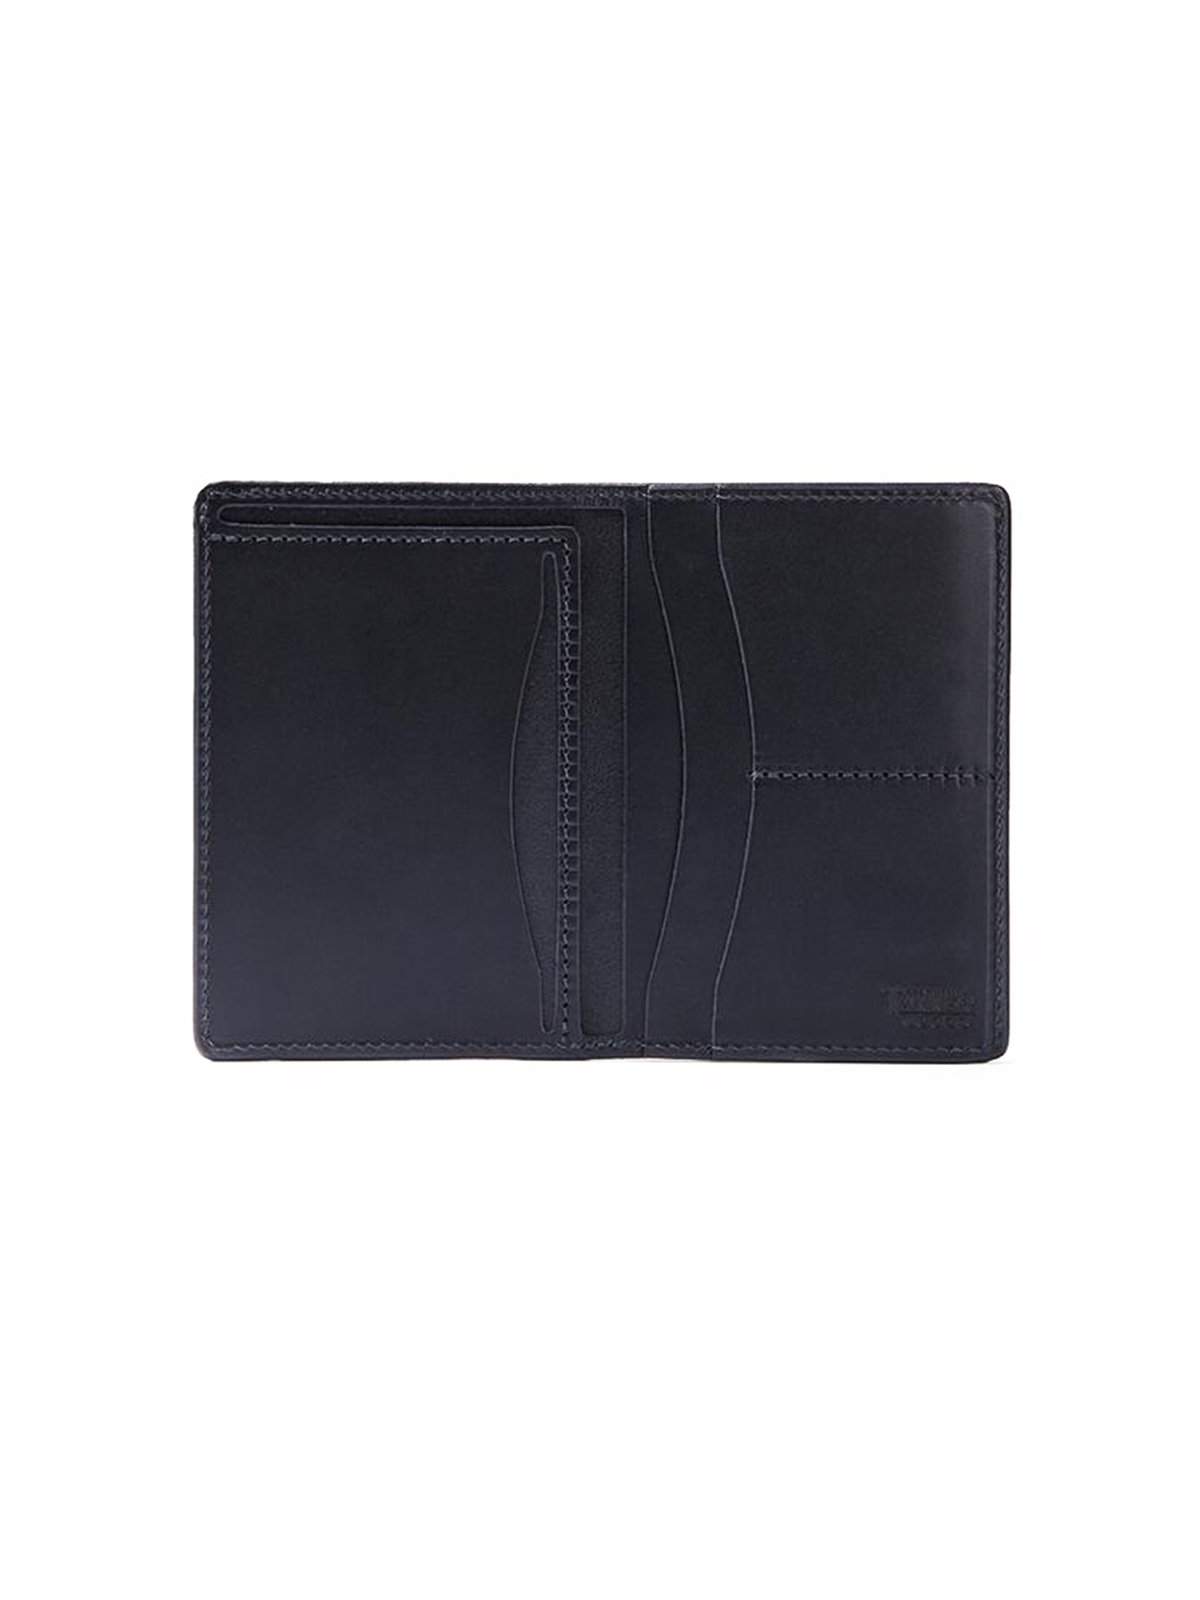 Tanner Goods Travel Wallet Black - MORE by Morello Indonesia